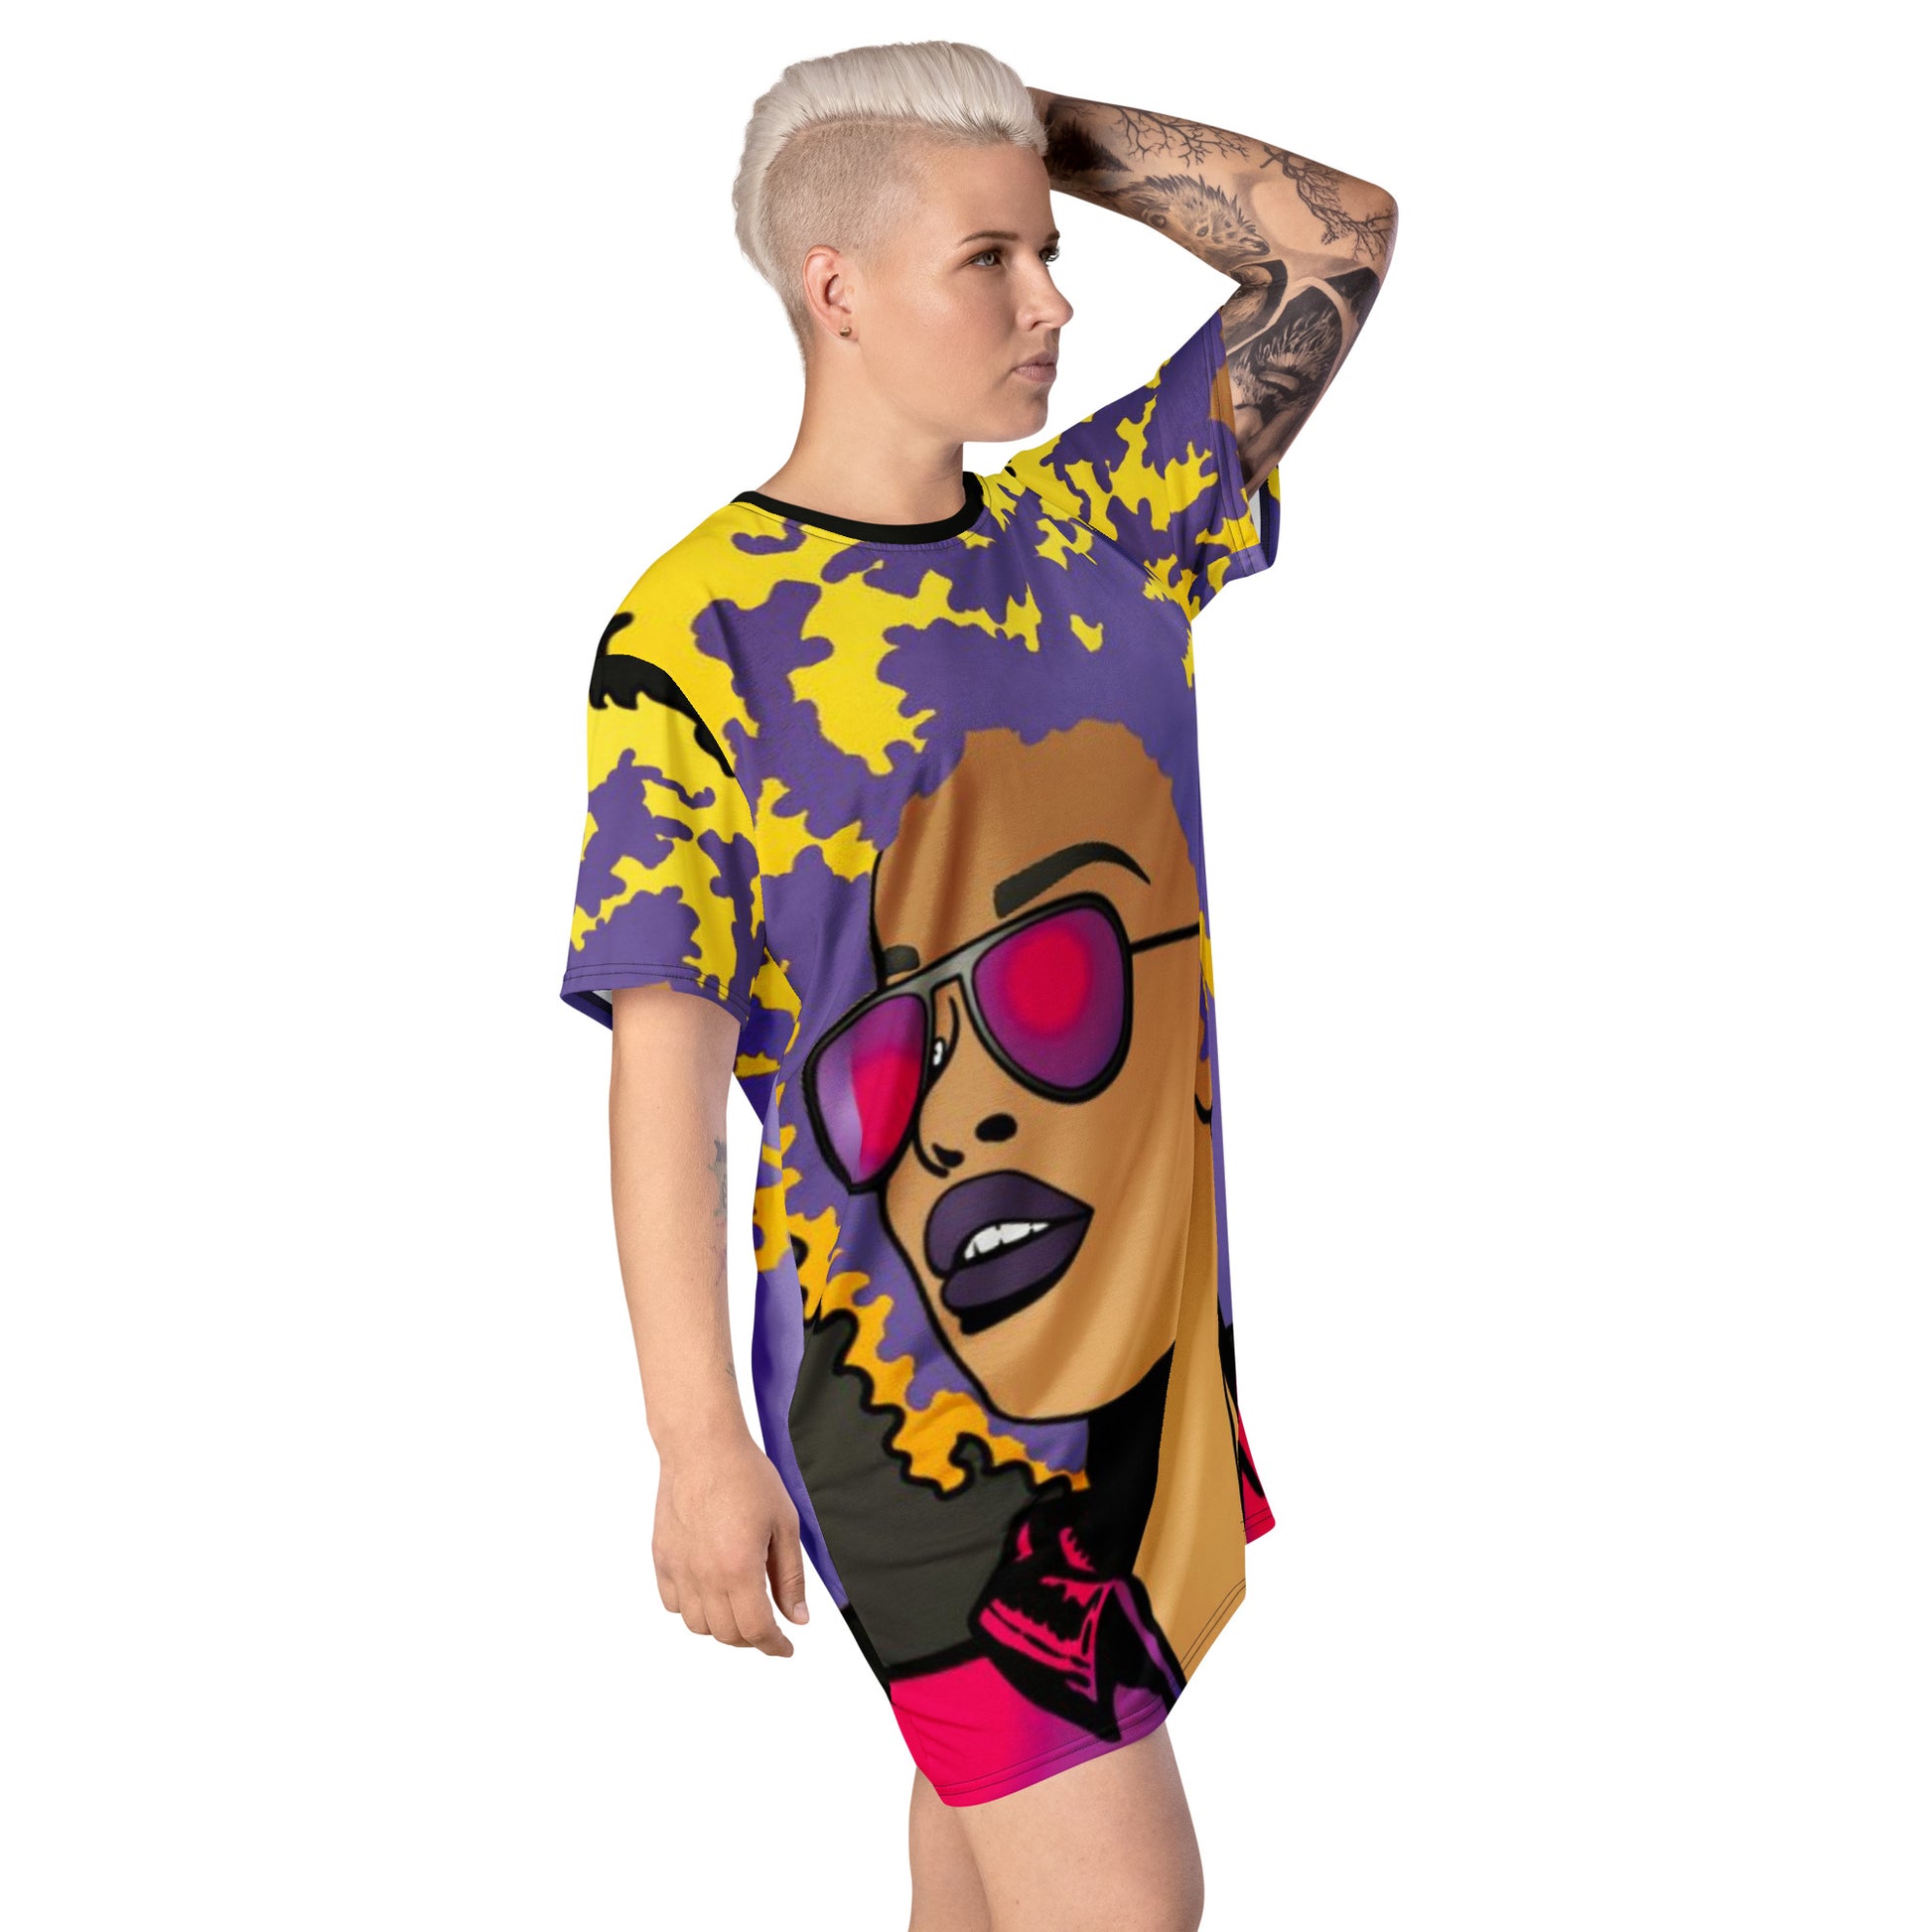 T-shirt Dress - O By Onica Online Store